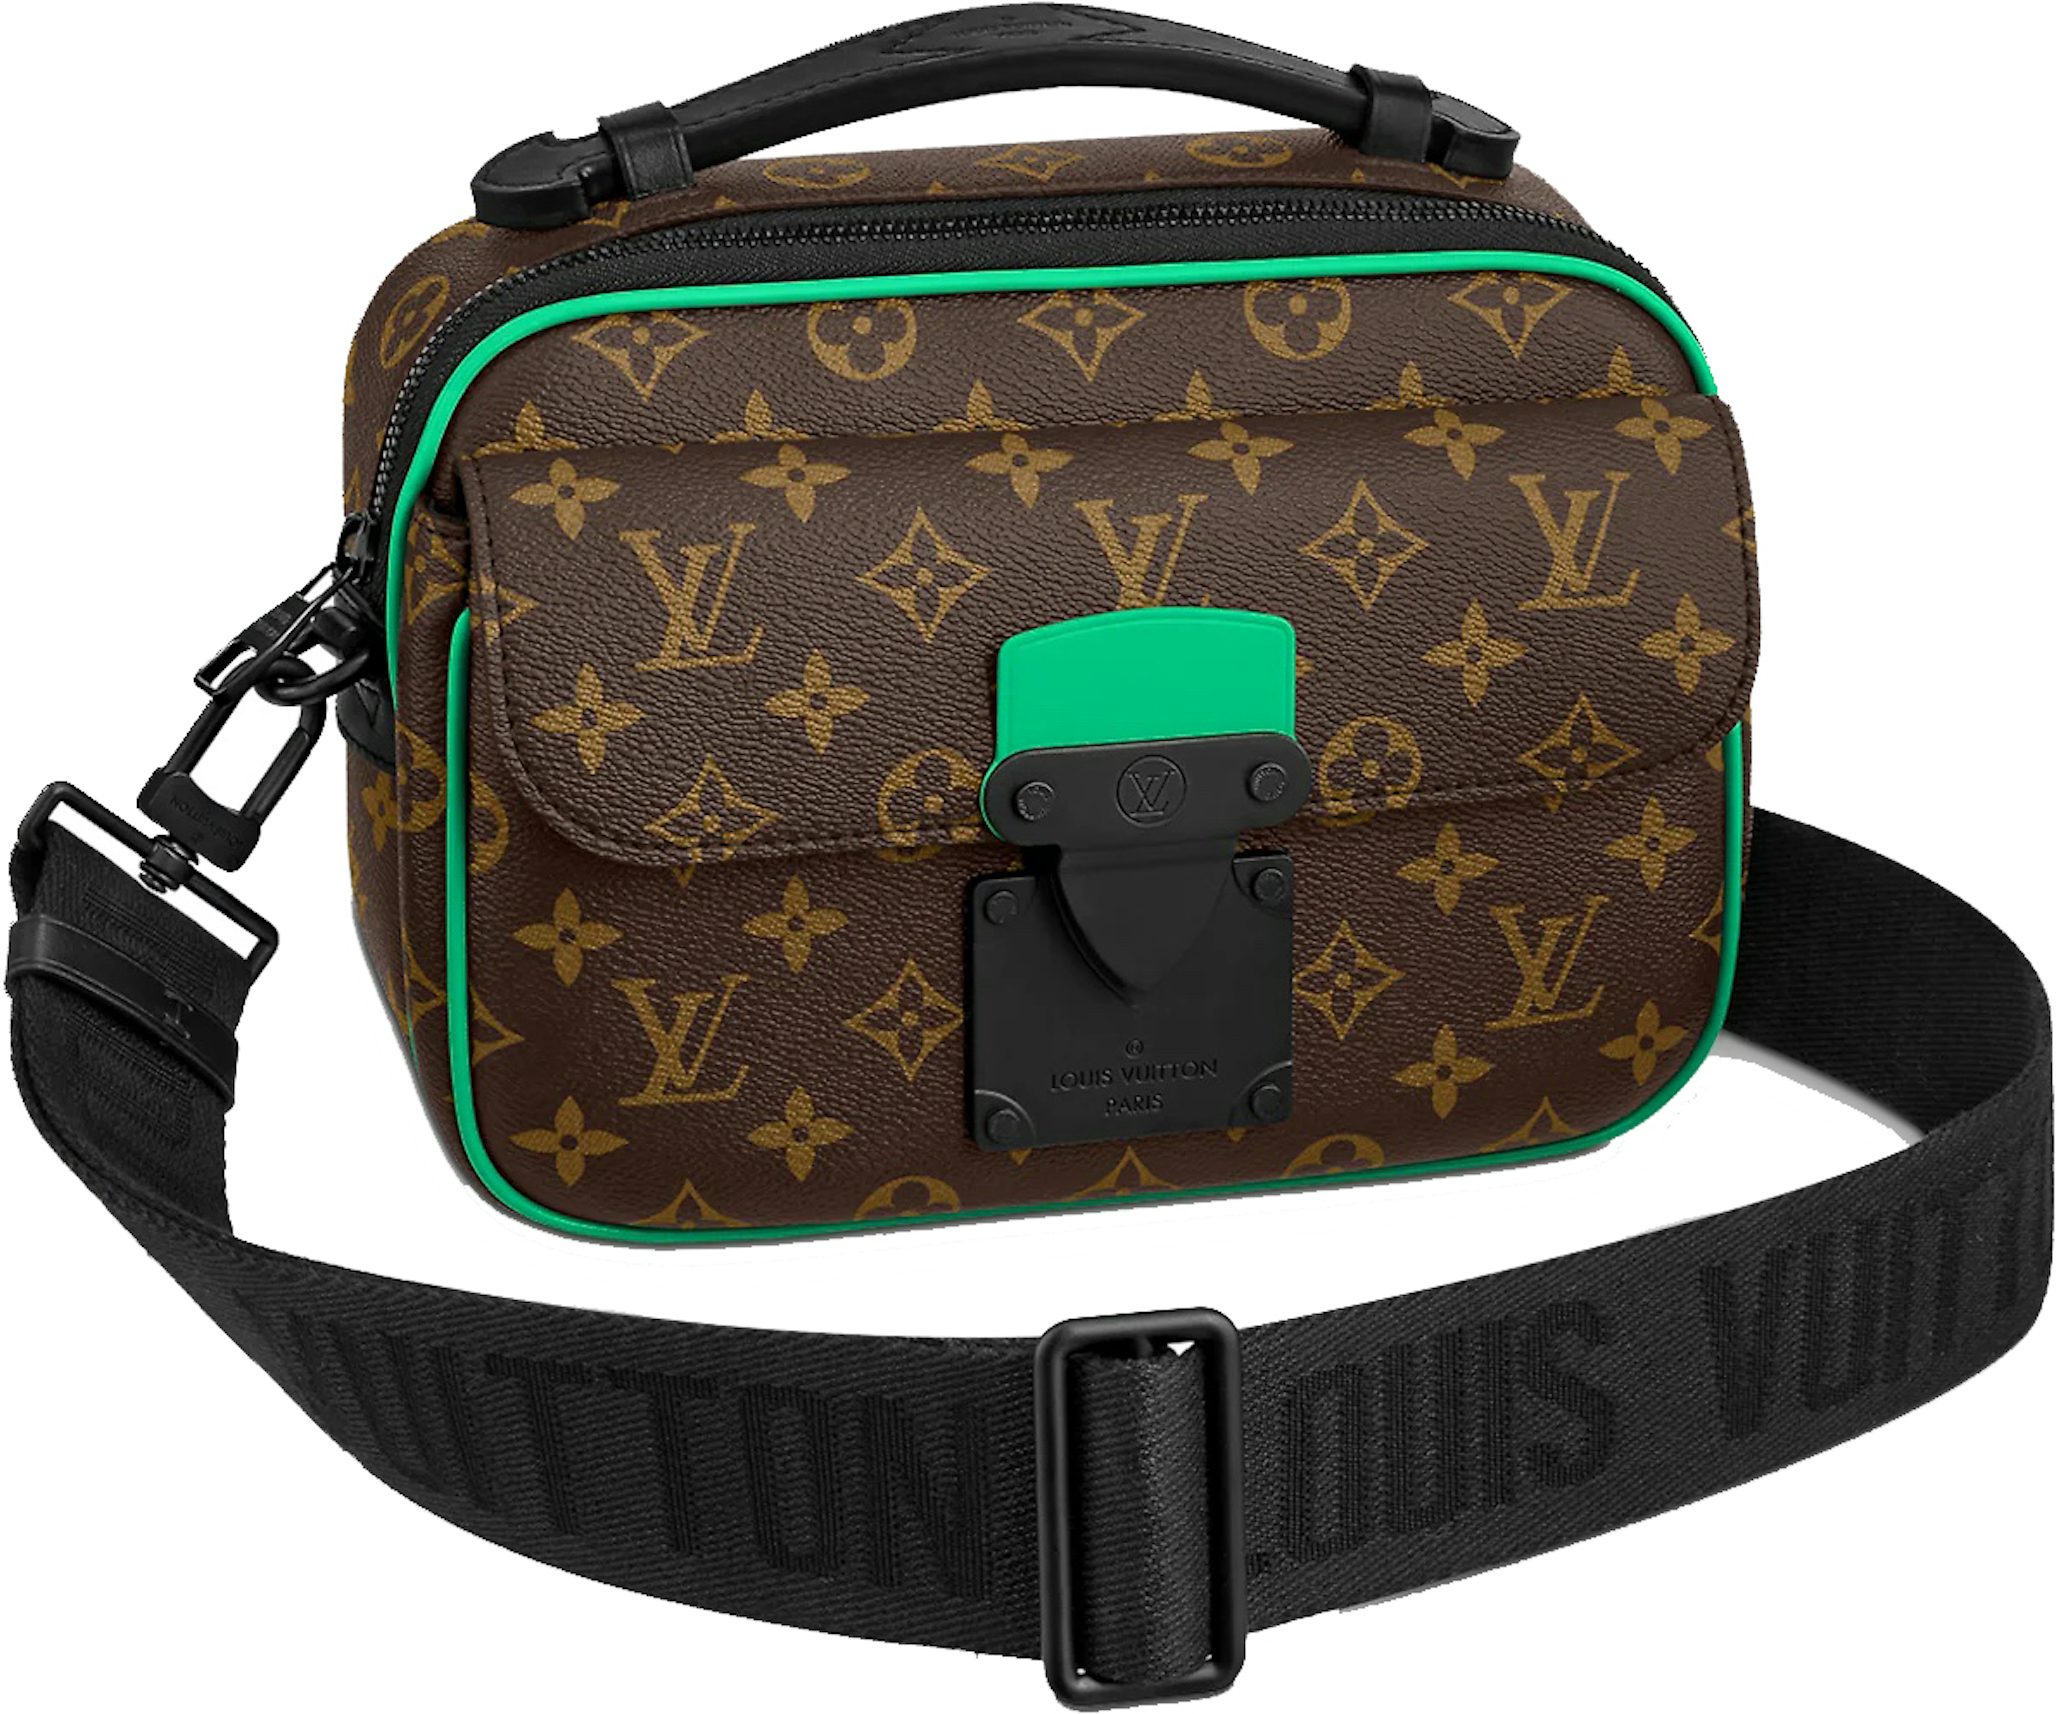 LOUIS VUITTON S LOCK MESSENGER TAURILLON LEATHER ( MINTY GREEN